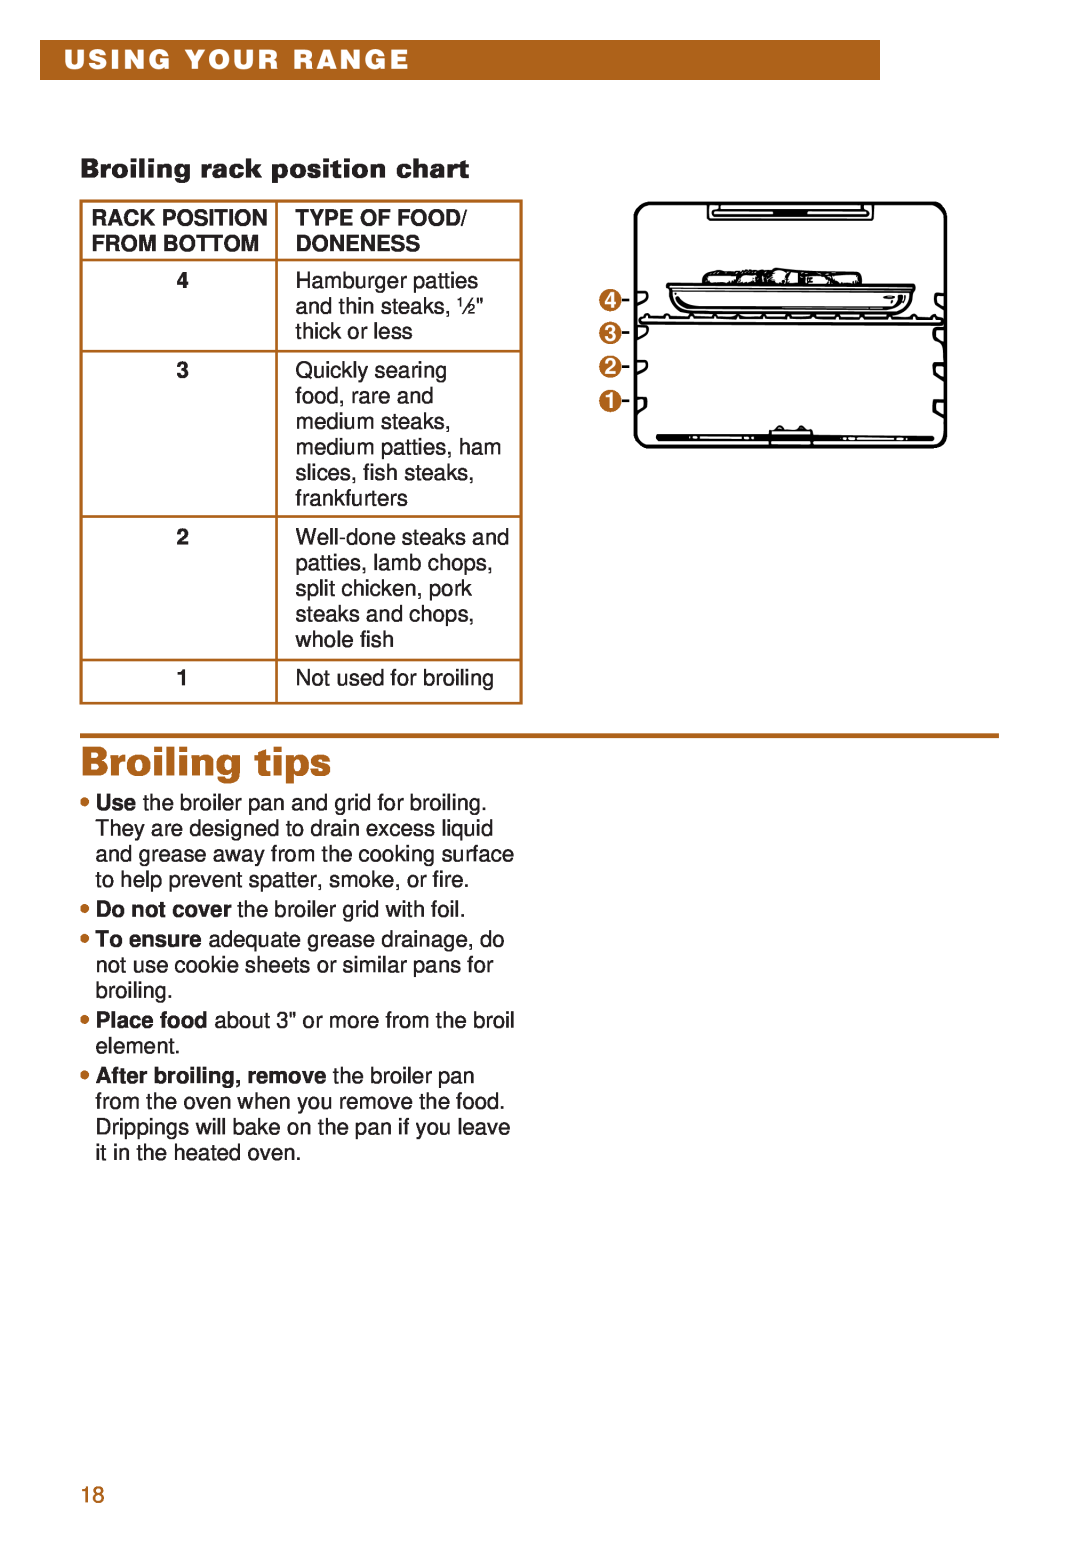 Whirlpool RS385PXE, RS385PCE important safety instructions Broiling tips, Broiling rack position chart, Using Your Range 